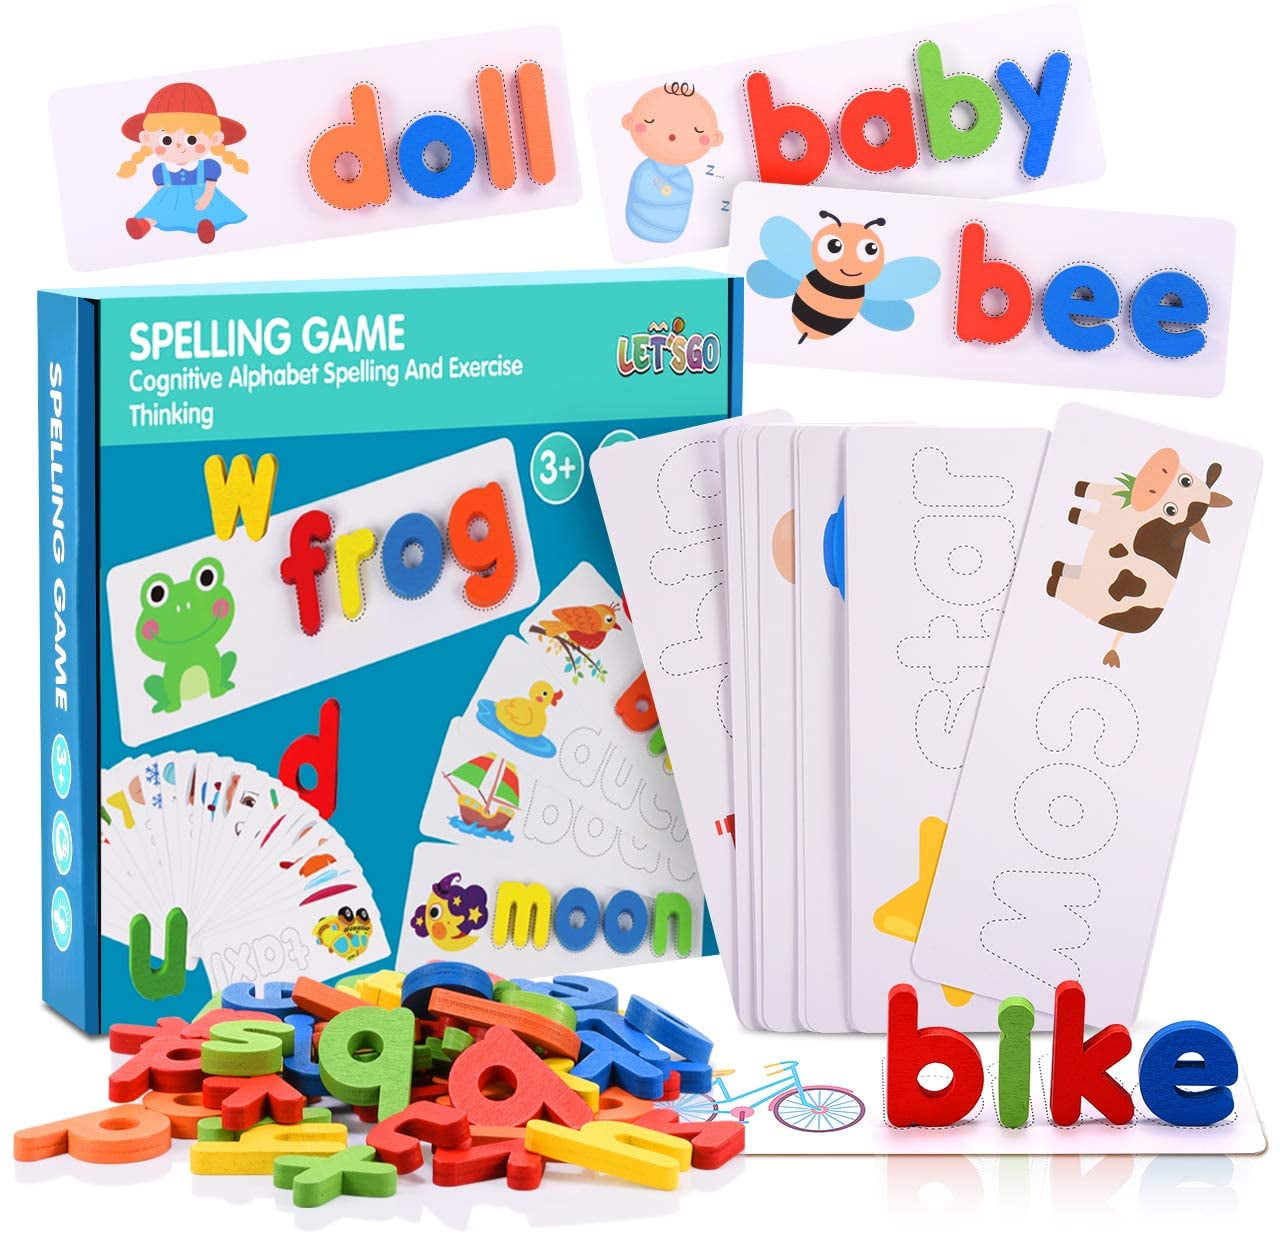 Wooden Developmental Toys Puzzle Preschool Spelling Game Matching Letter Game UK 